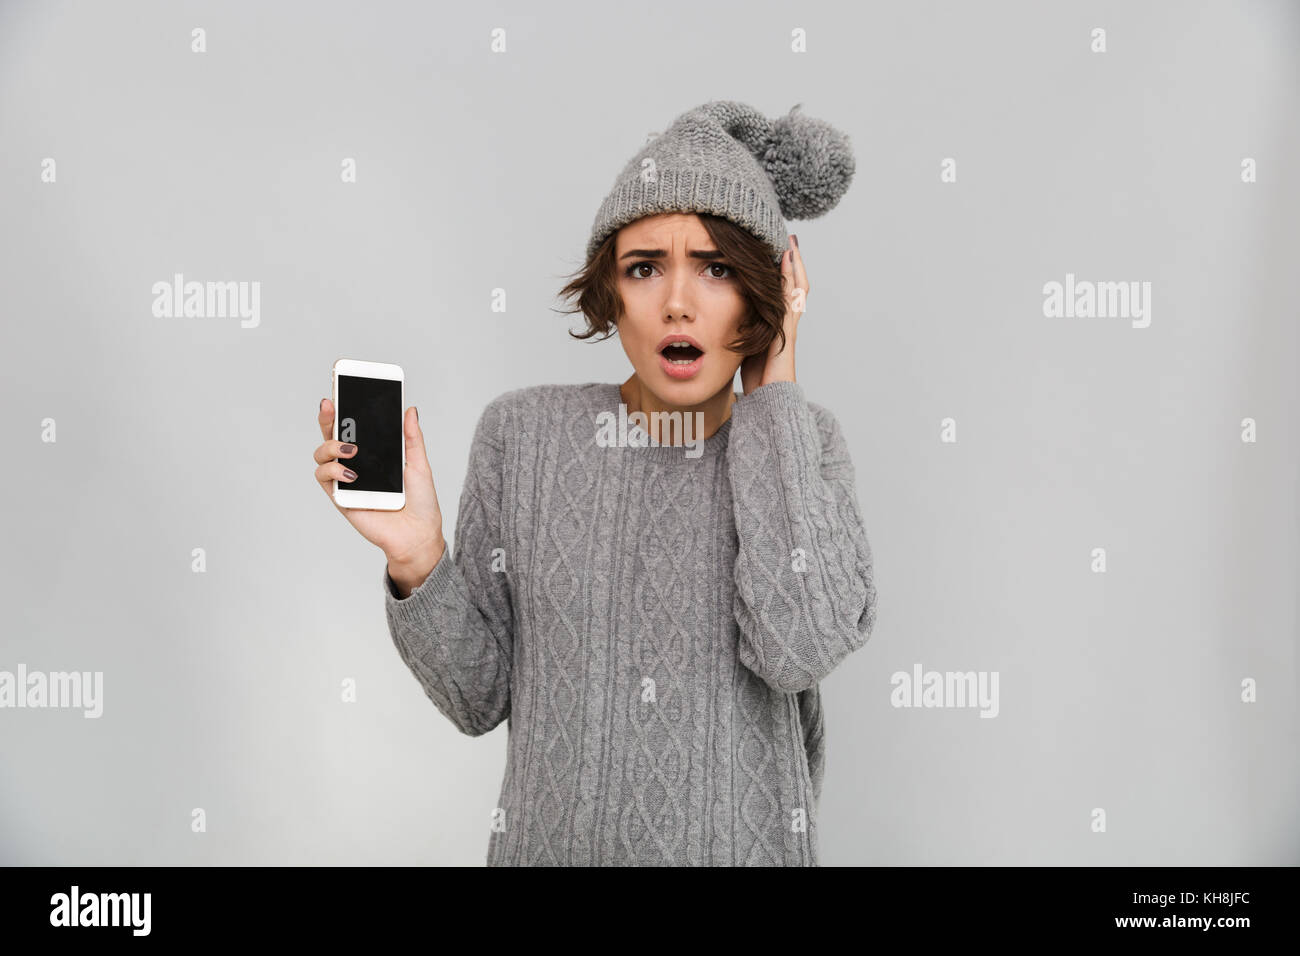 Porttrait of shocked young girl in sweater and hat pointing finger at blank screen mobile phone isolated over gray background Stock Photo